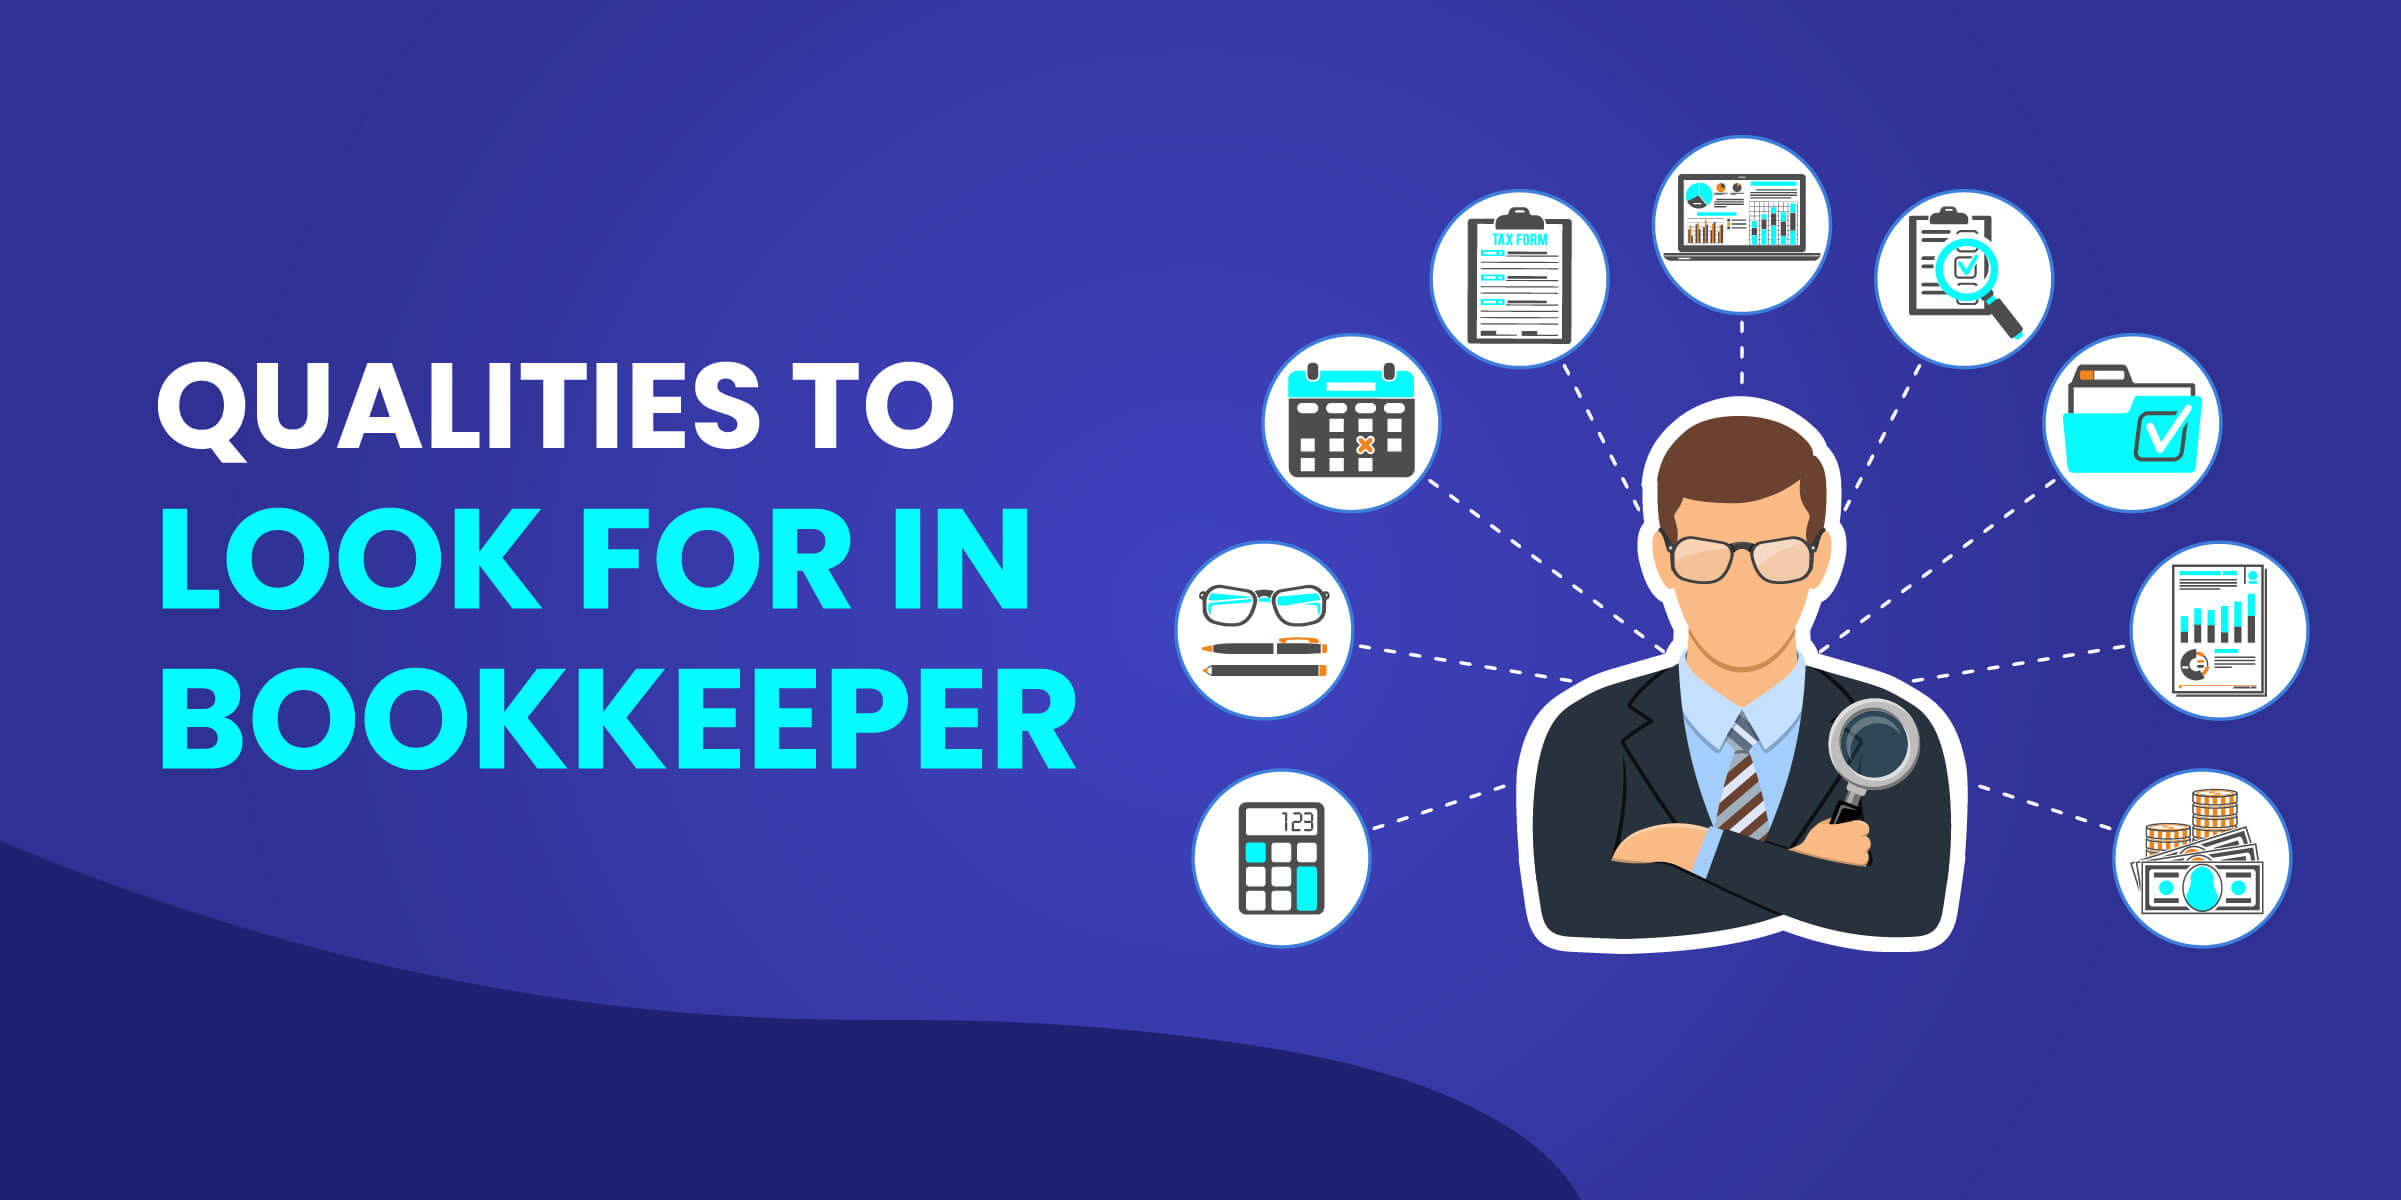 Qualities to Look for In Bookkeeper